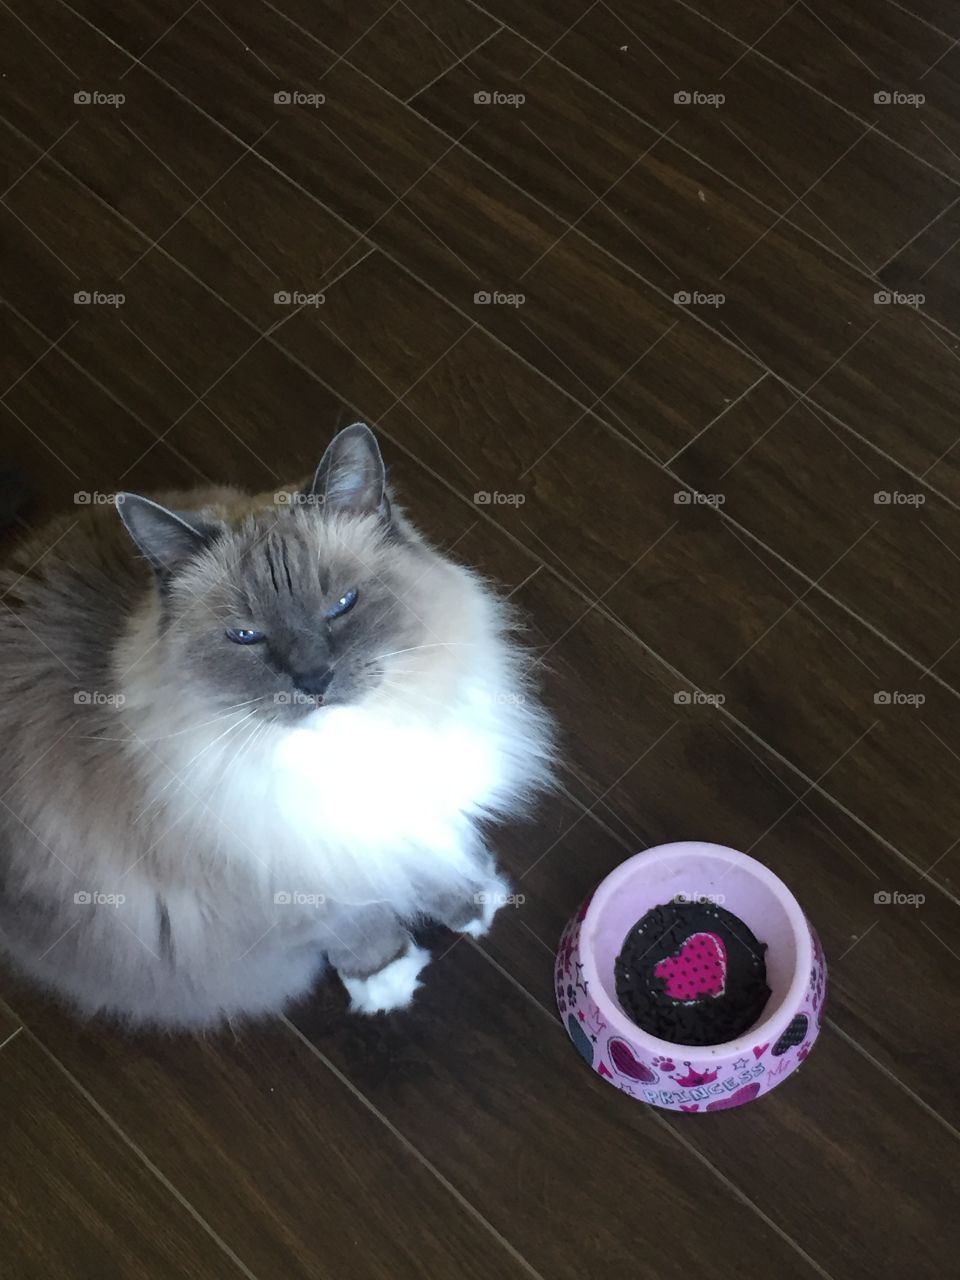 A funny picture of my cute ragdoll cat, she’s mad at me because her bowl is half empty